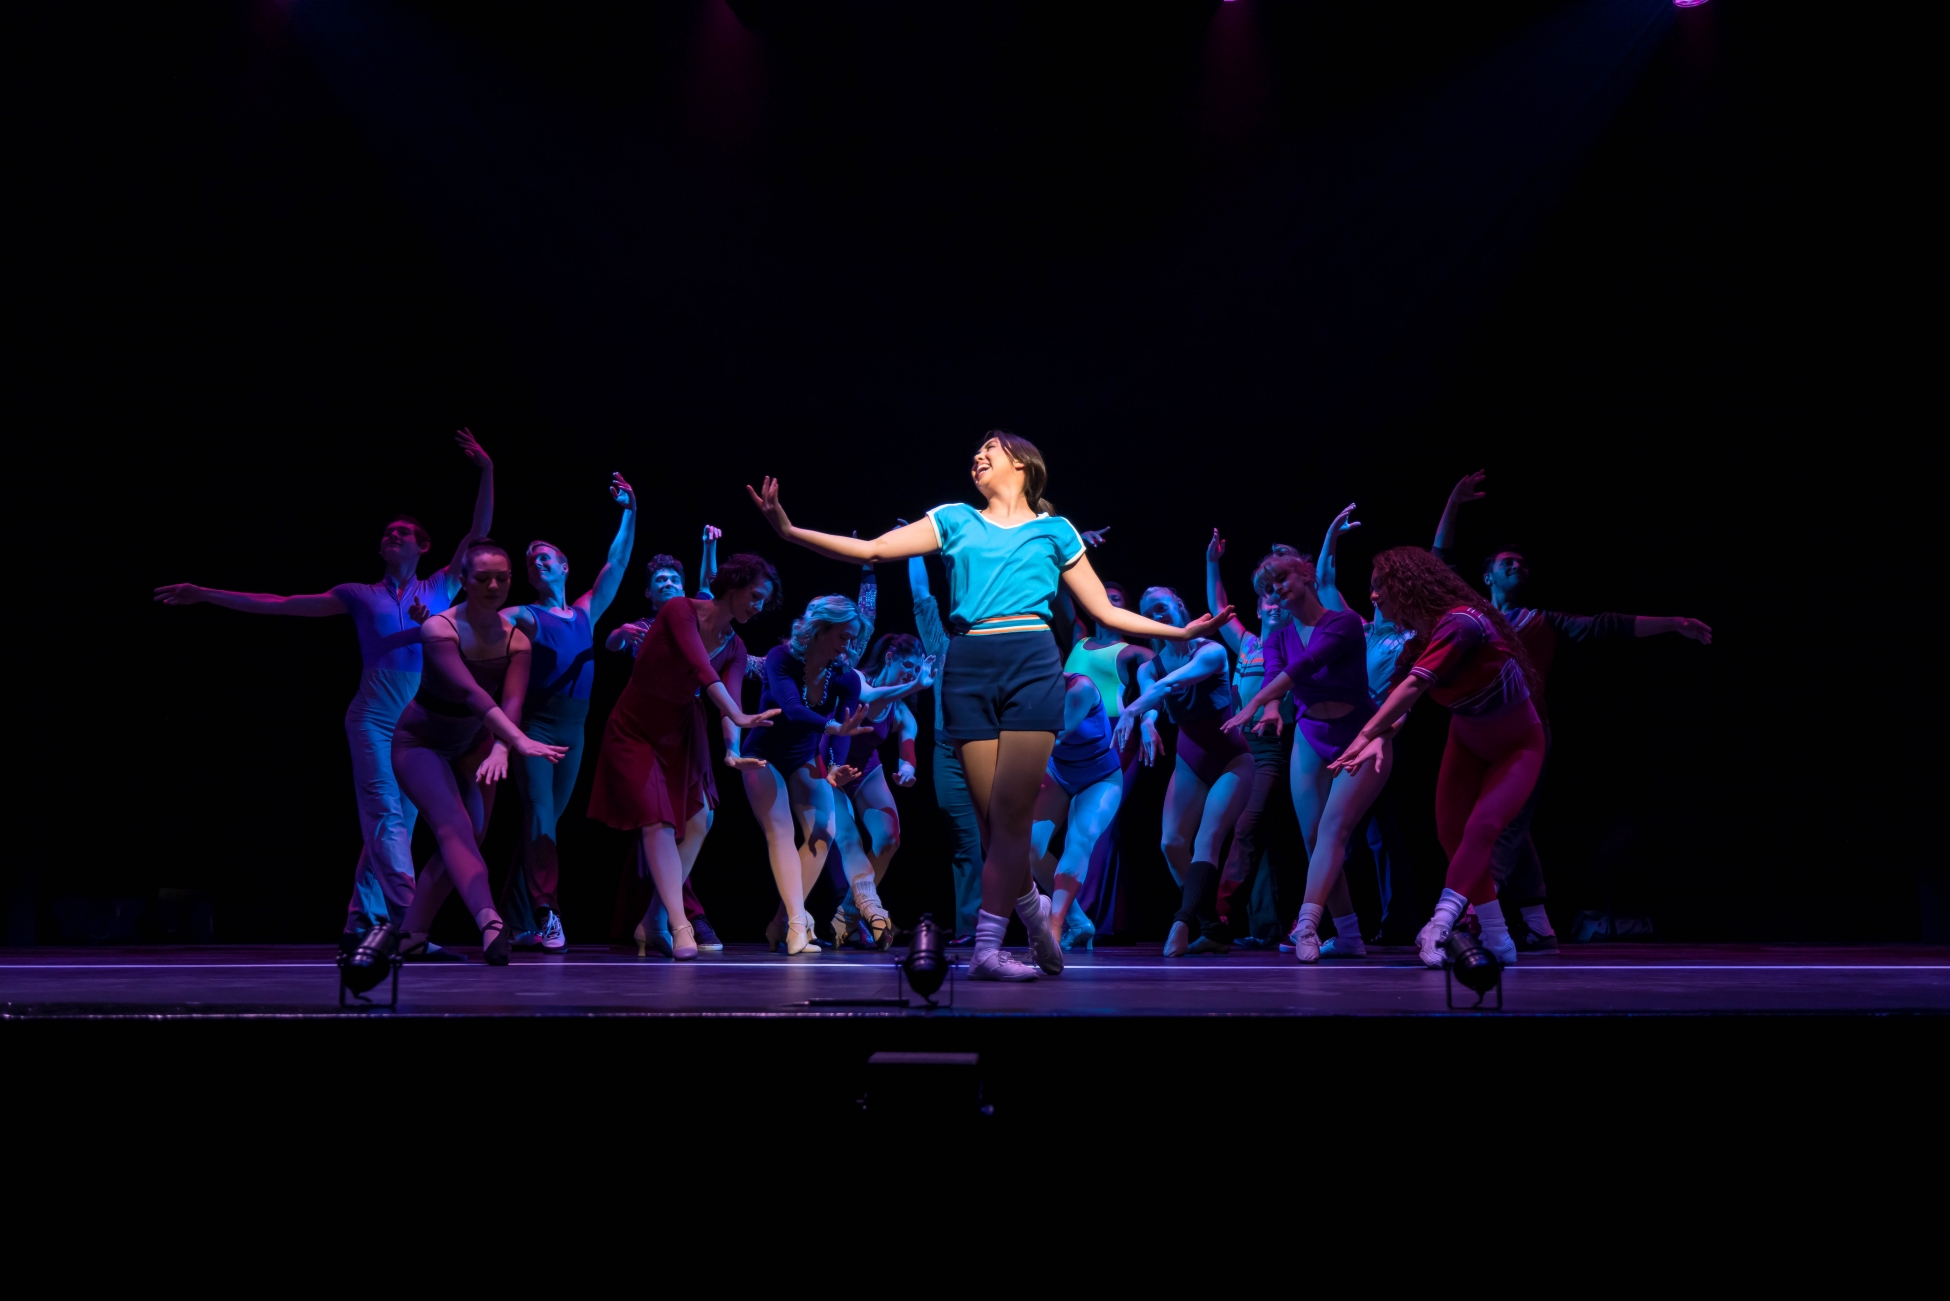 Justine Rappaport as Connie in A Chorus Line stands gracefully in front of a group of auditioners.